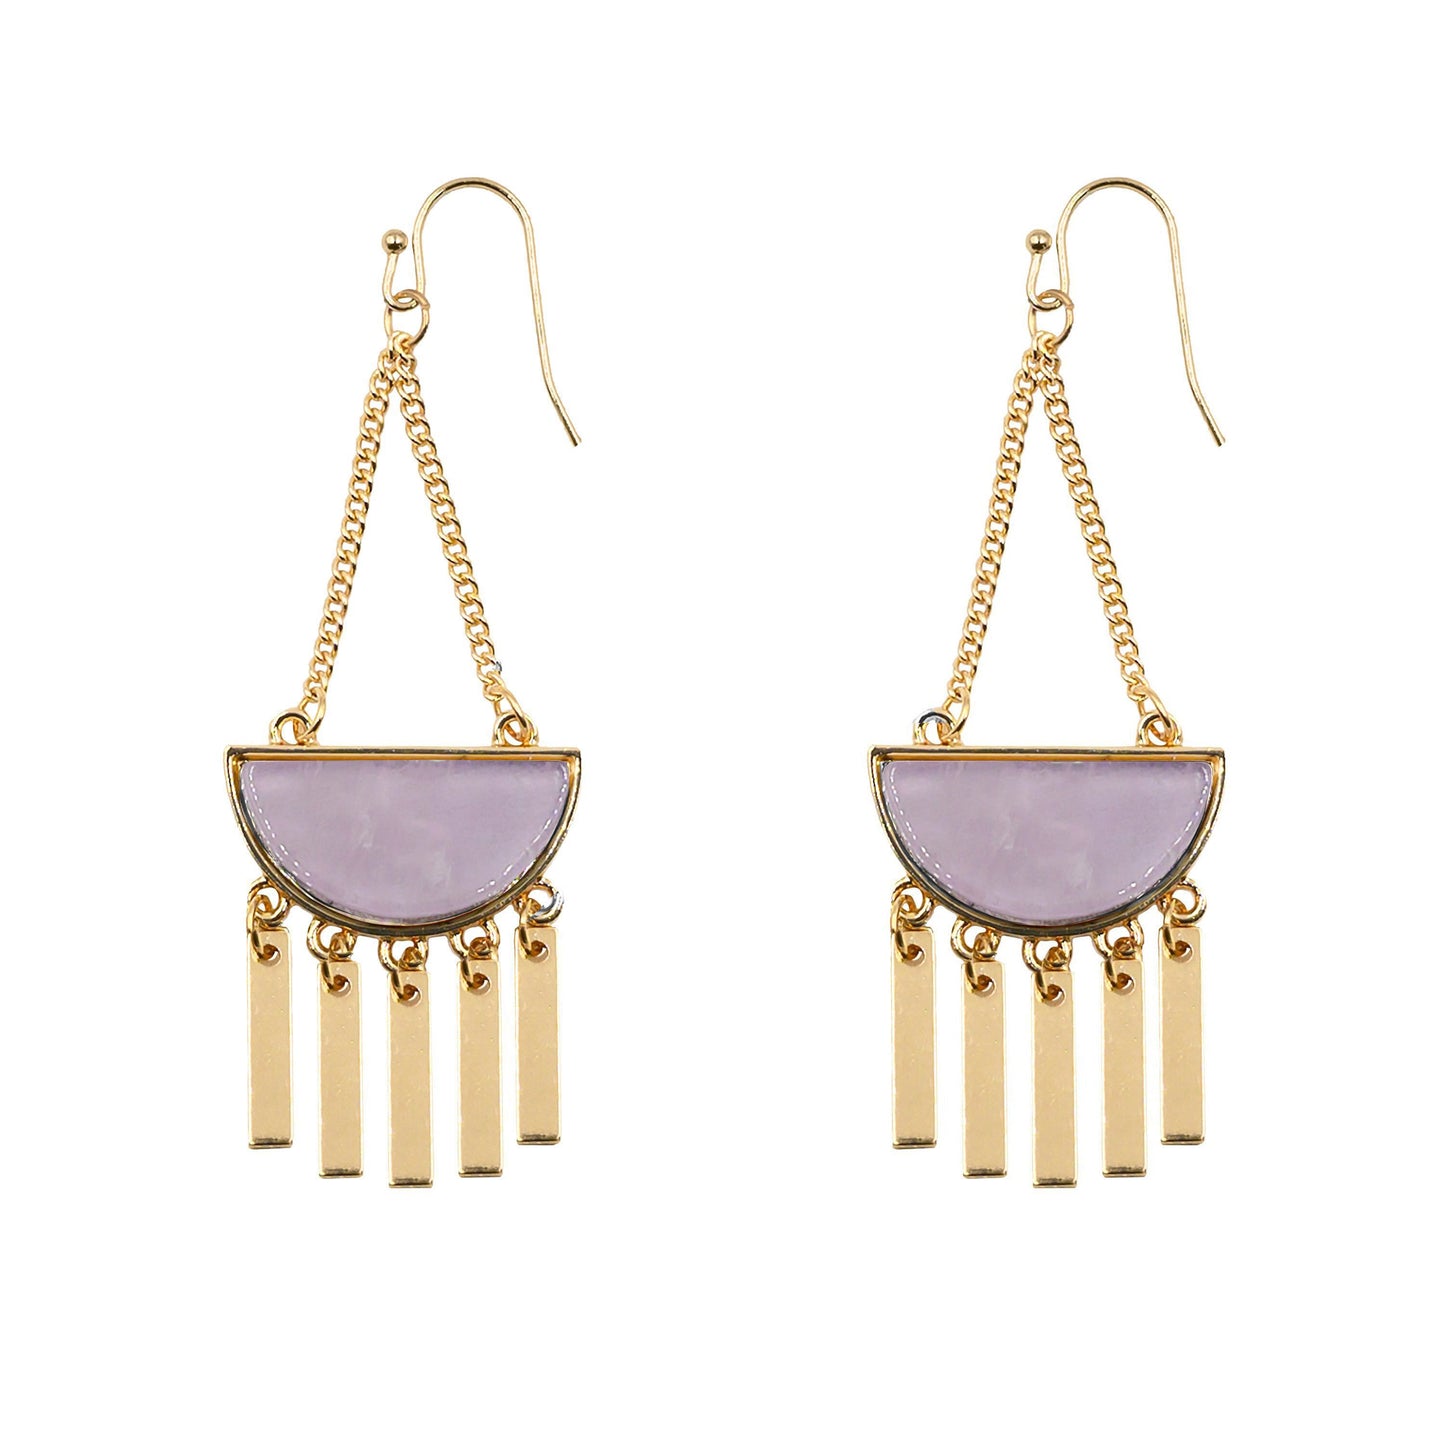 Bianca Collection - Lilac Earrings (Limited Edition)